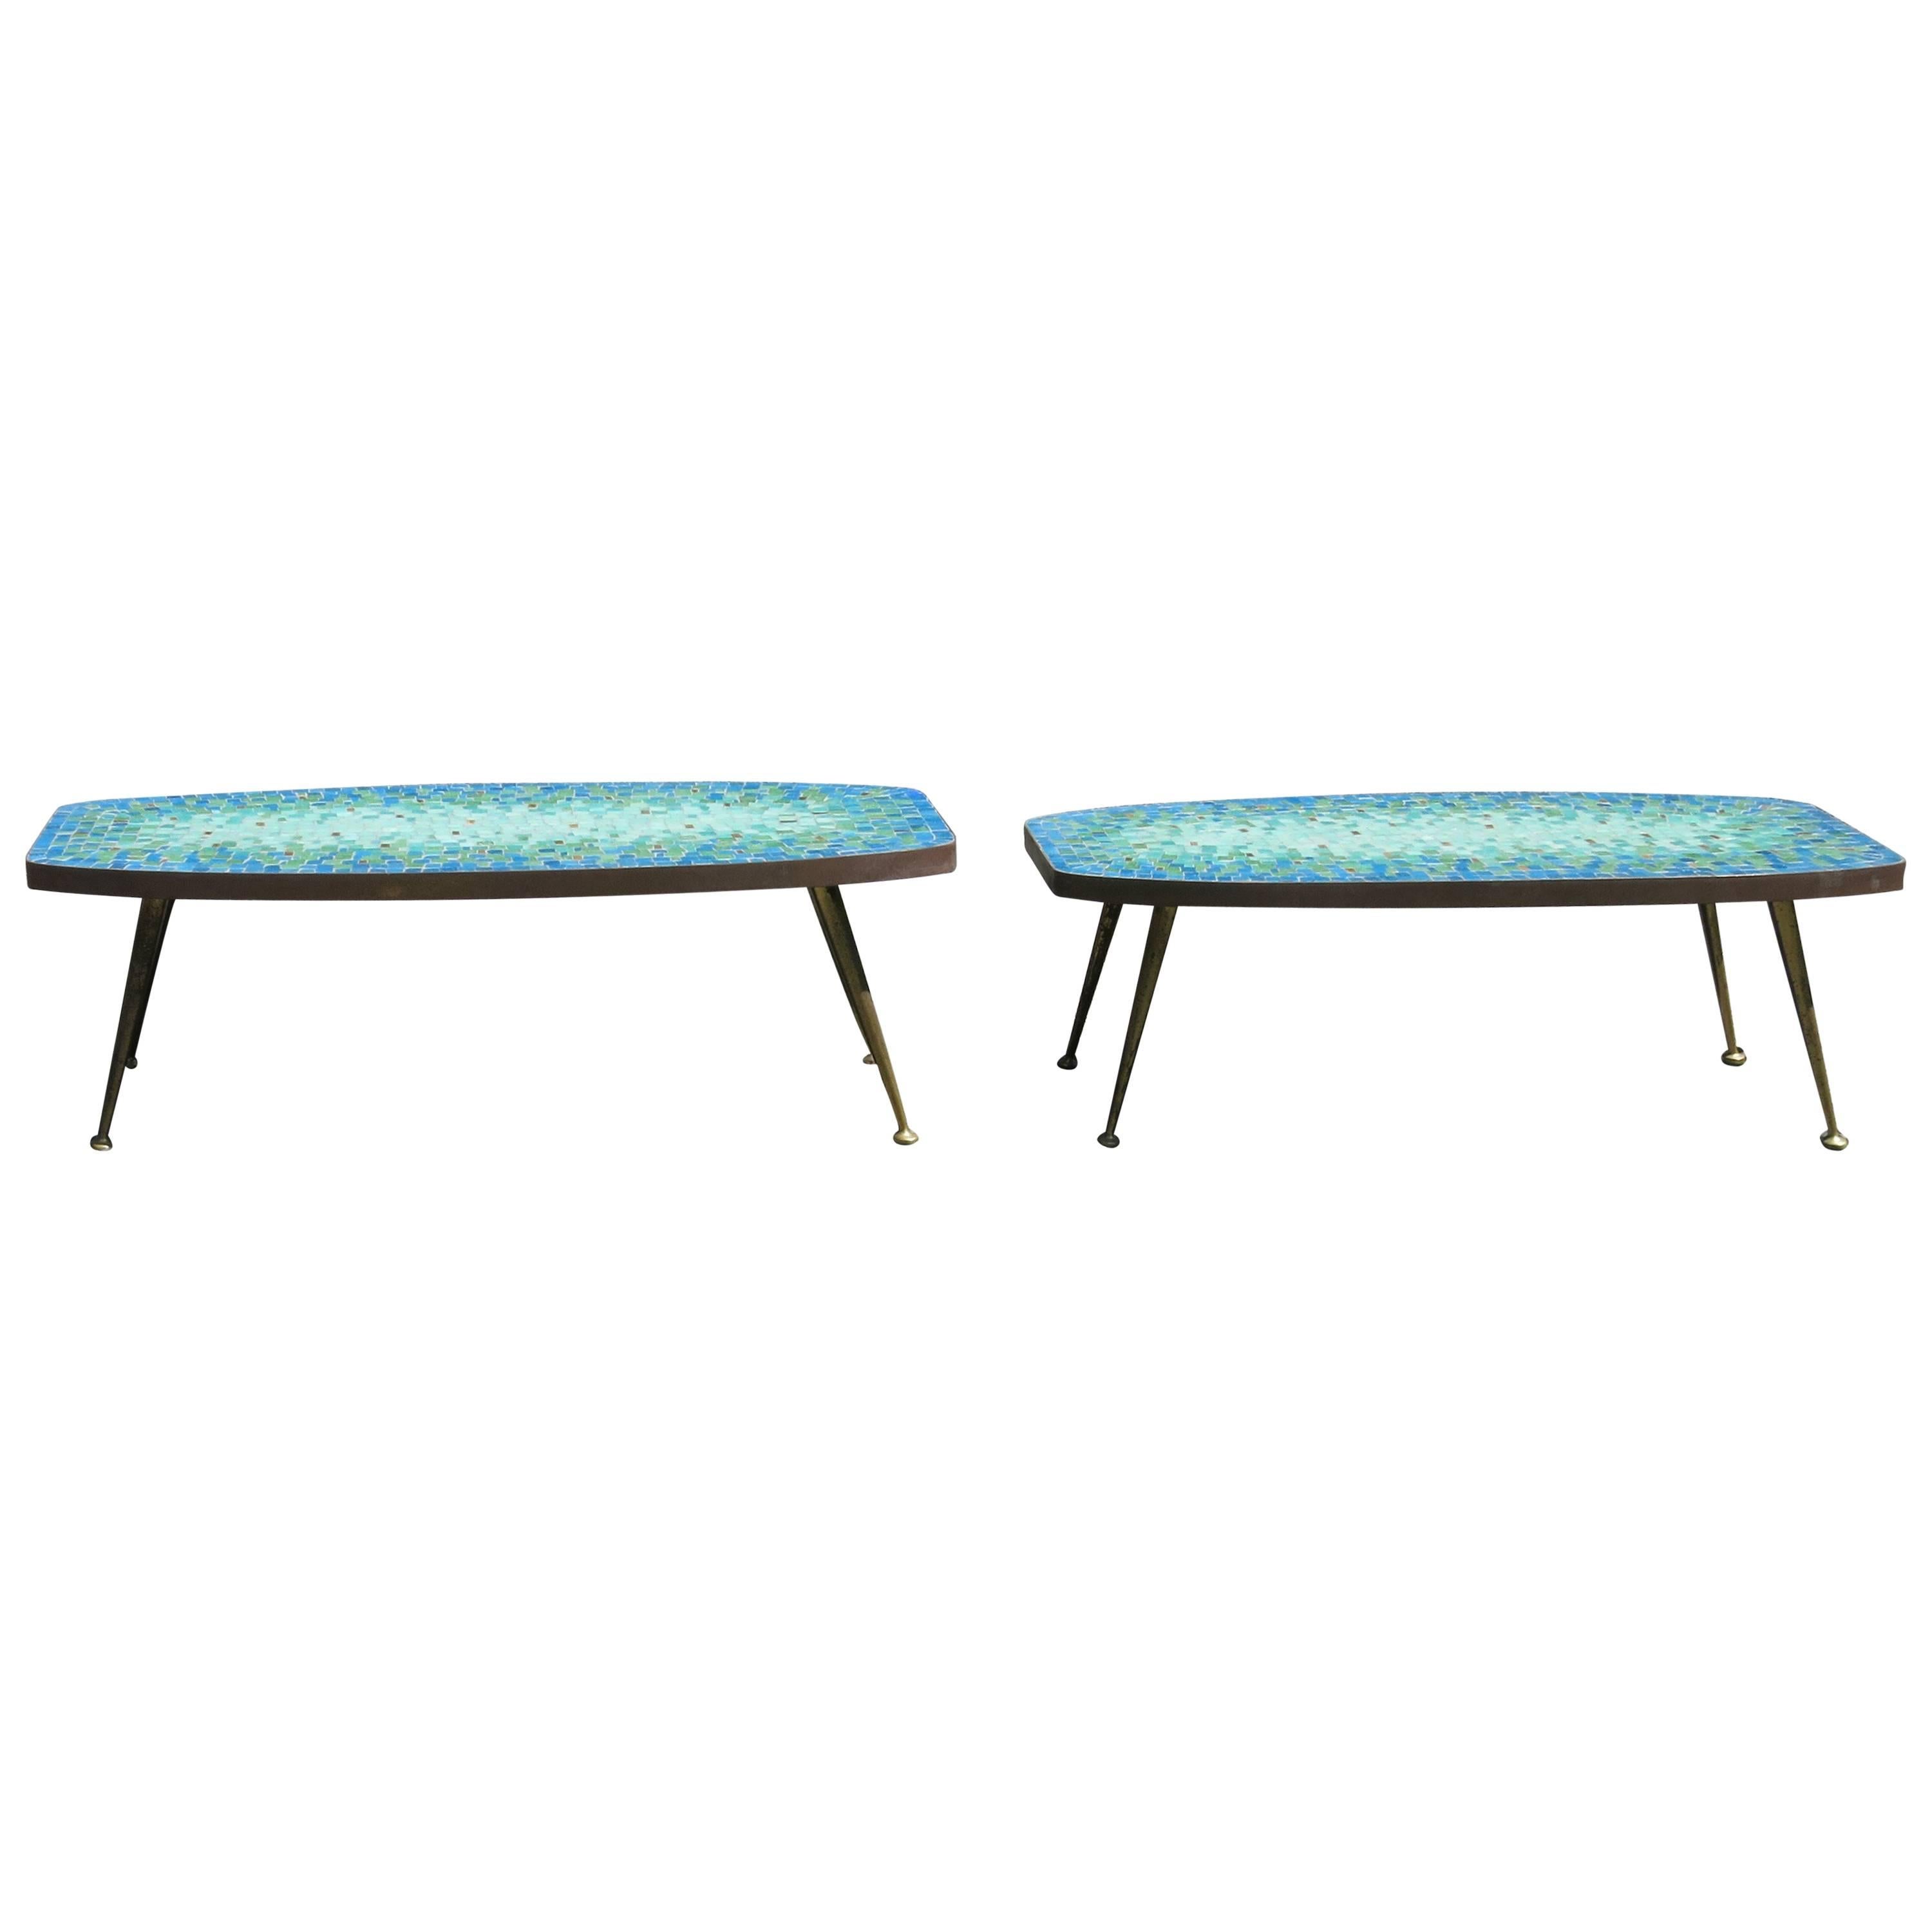 Pair of Italian Mid-Century Mosaic Glass Tile Top and Brass Tables